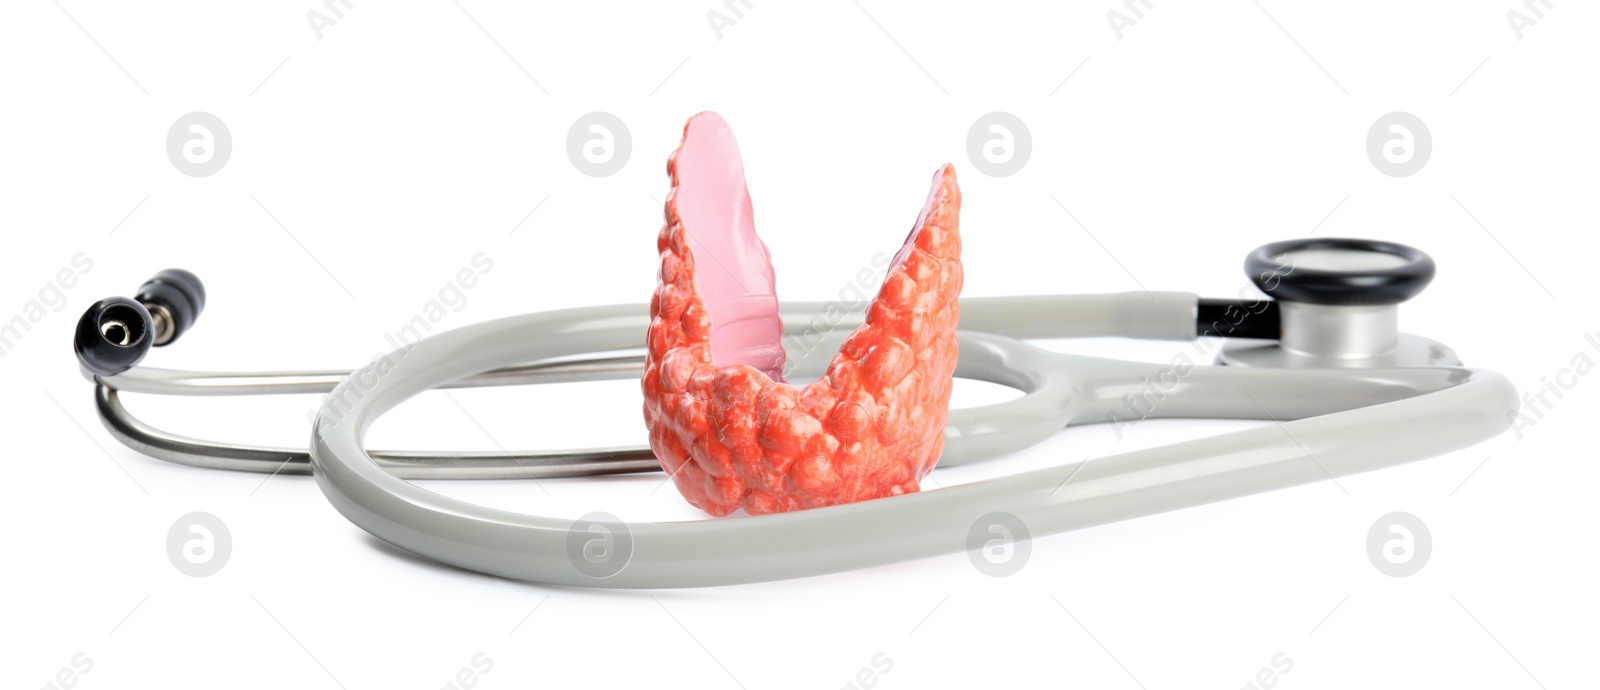 Photo of Plastic model of afflicted thyroid and stethoscope on white background